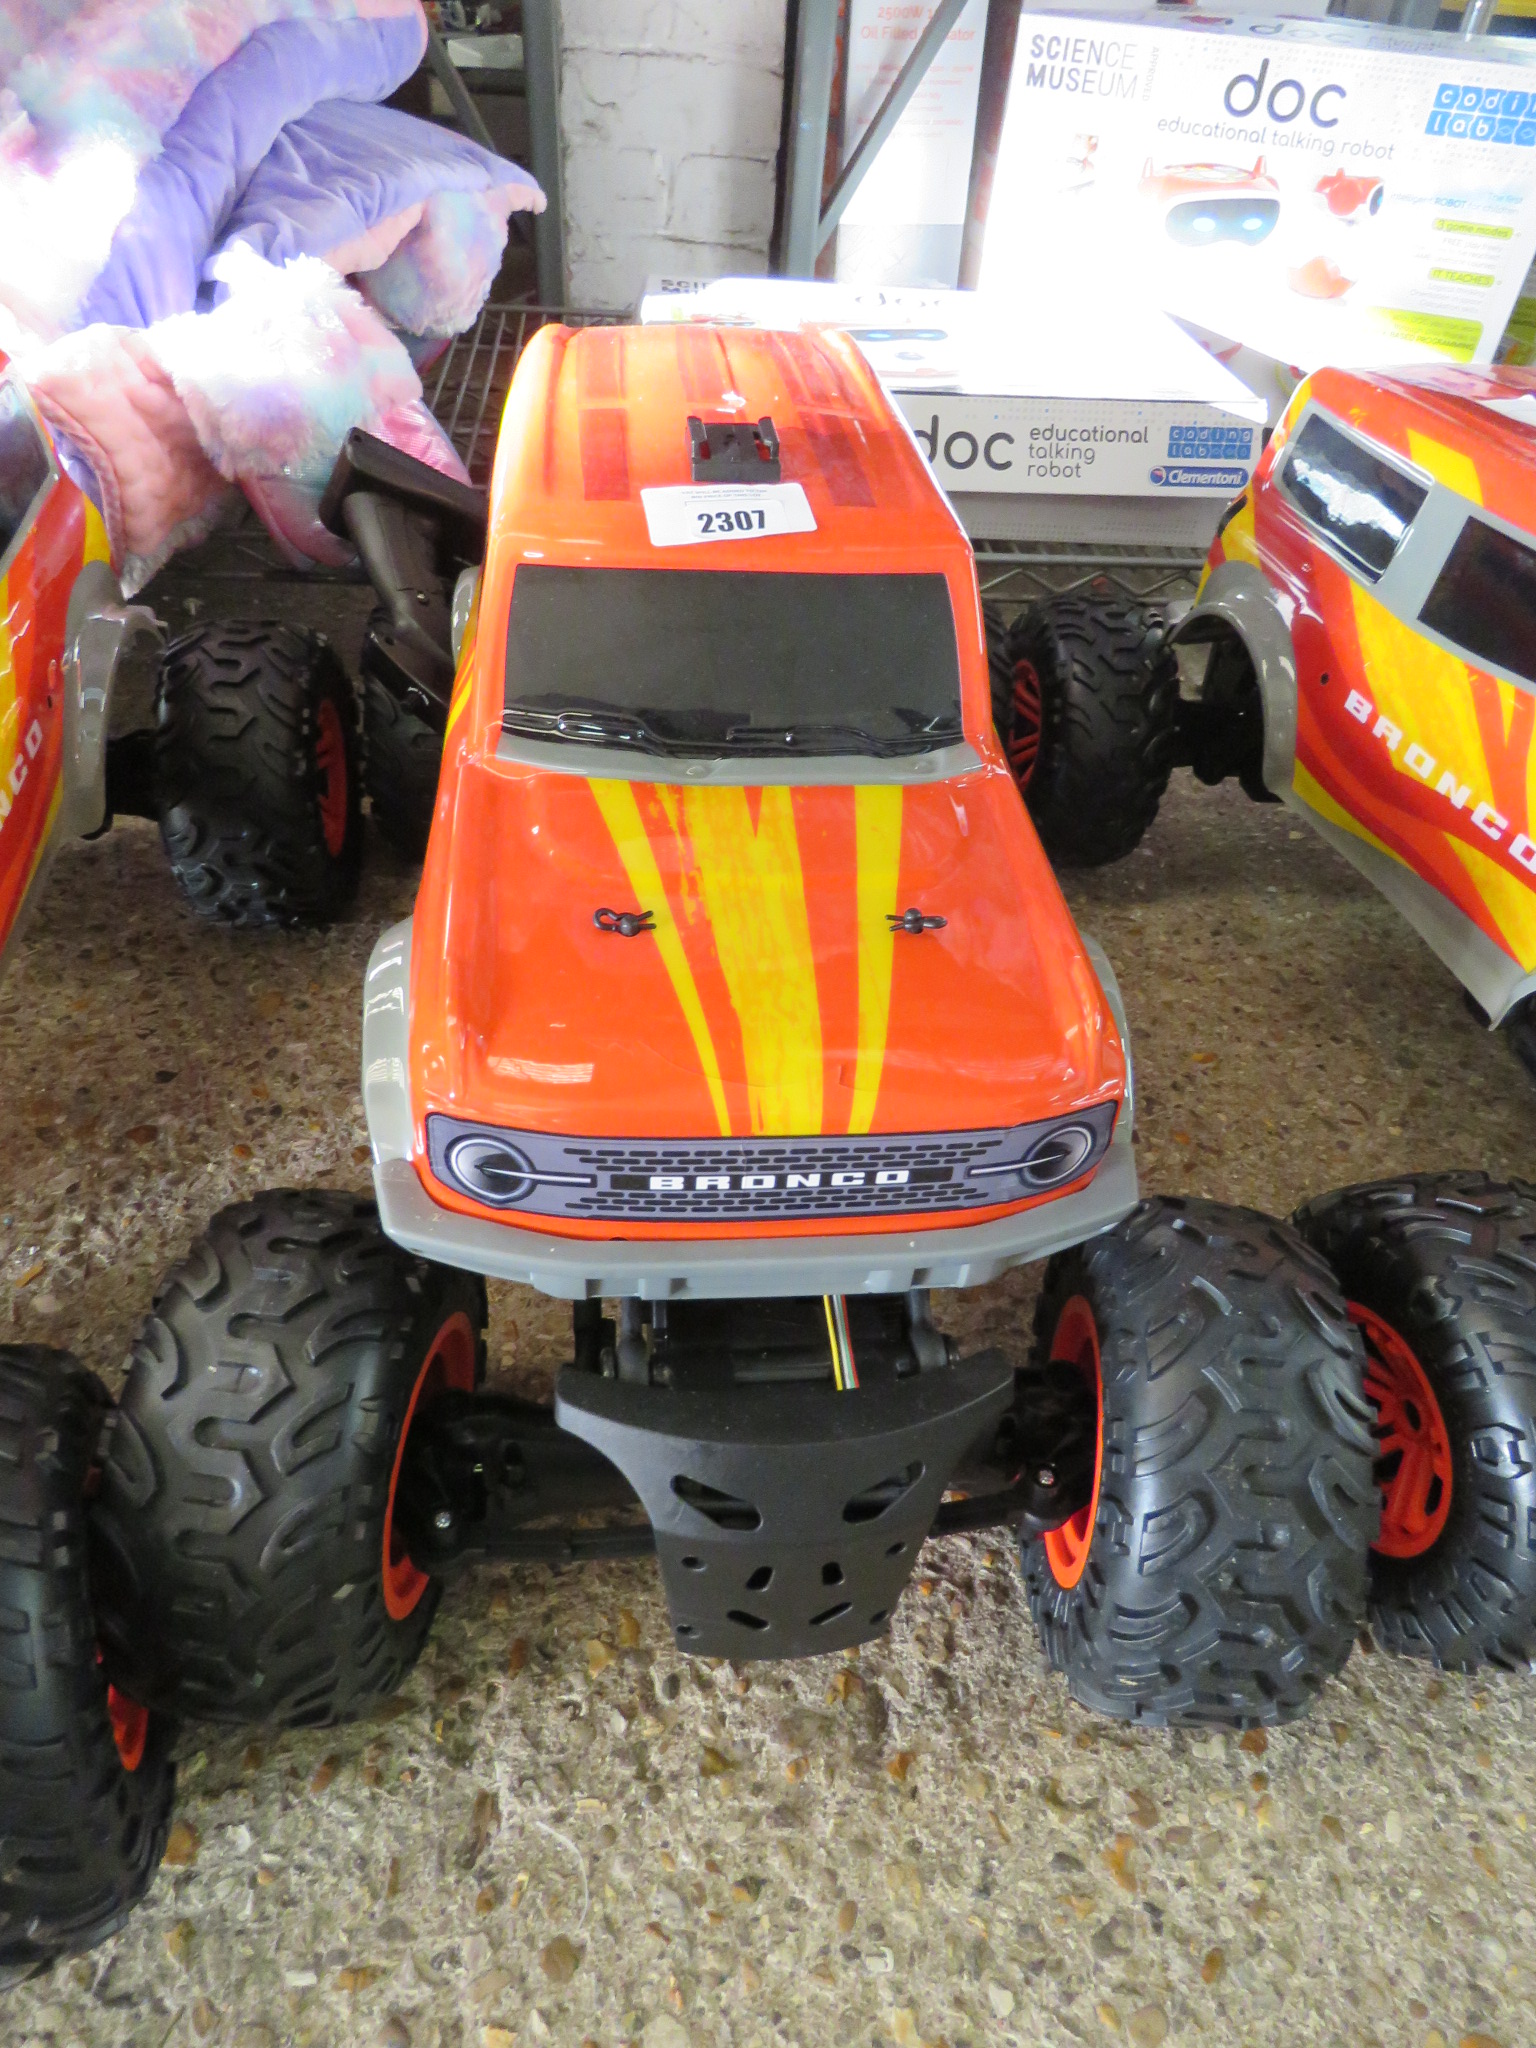 Large monster truck, with remote control